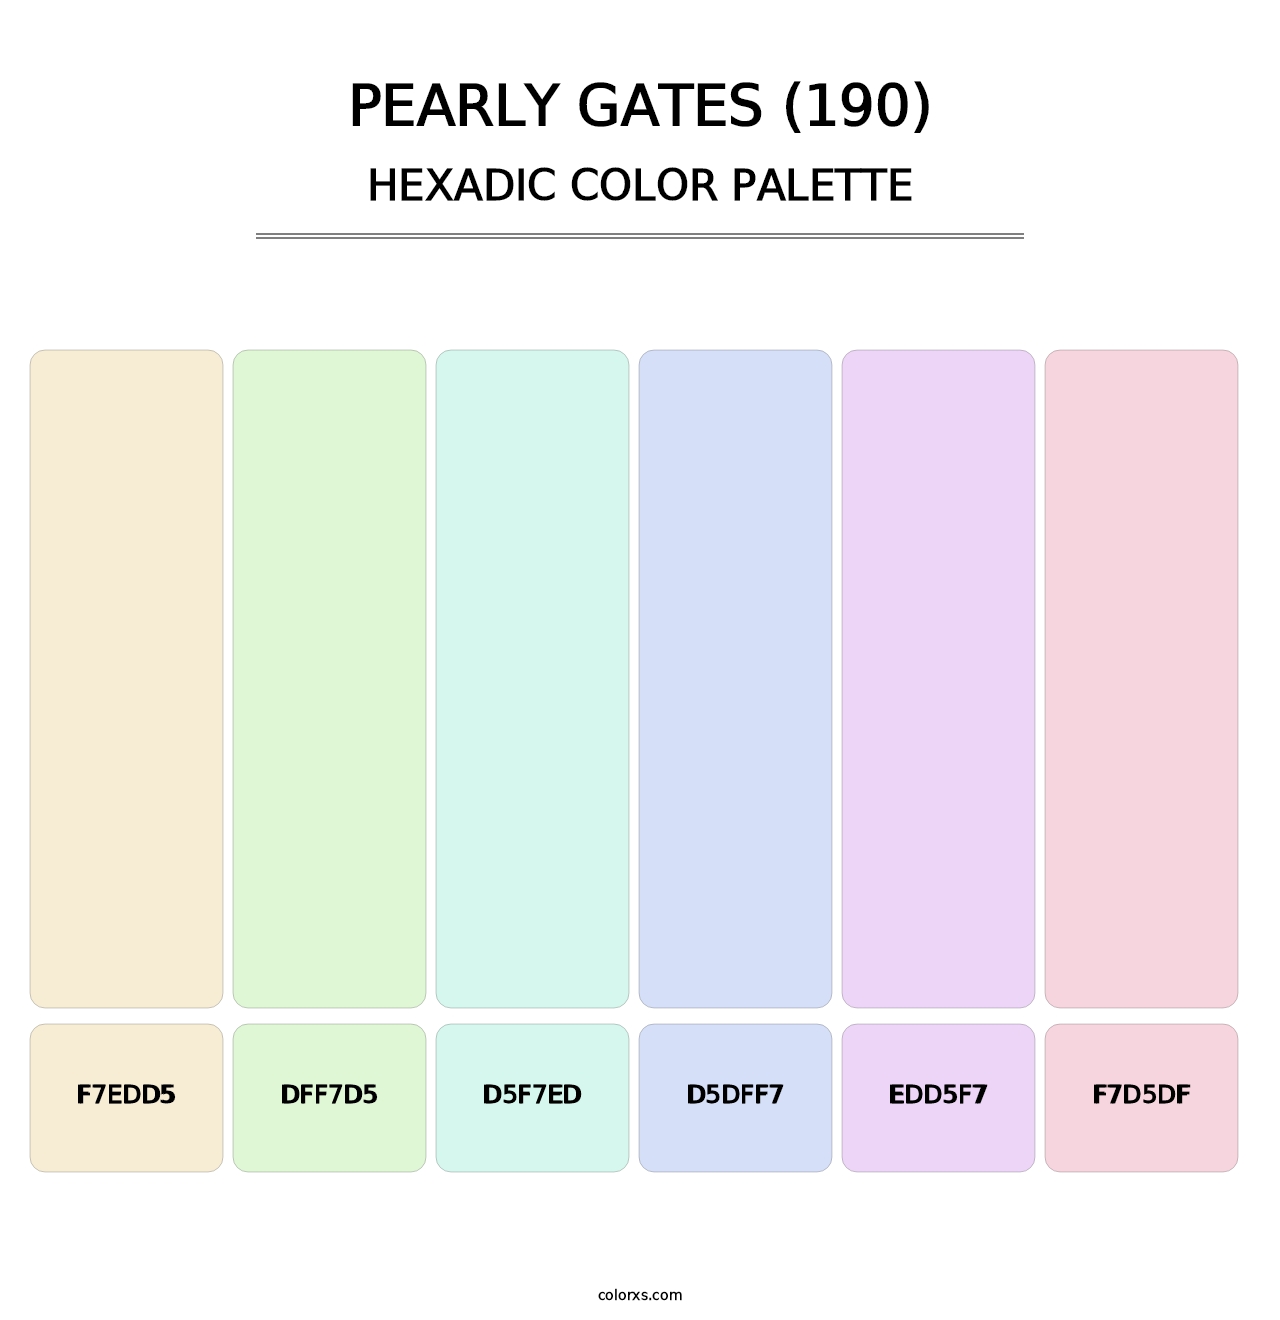 Pearly Gates (190) - Hexadic Color Palette